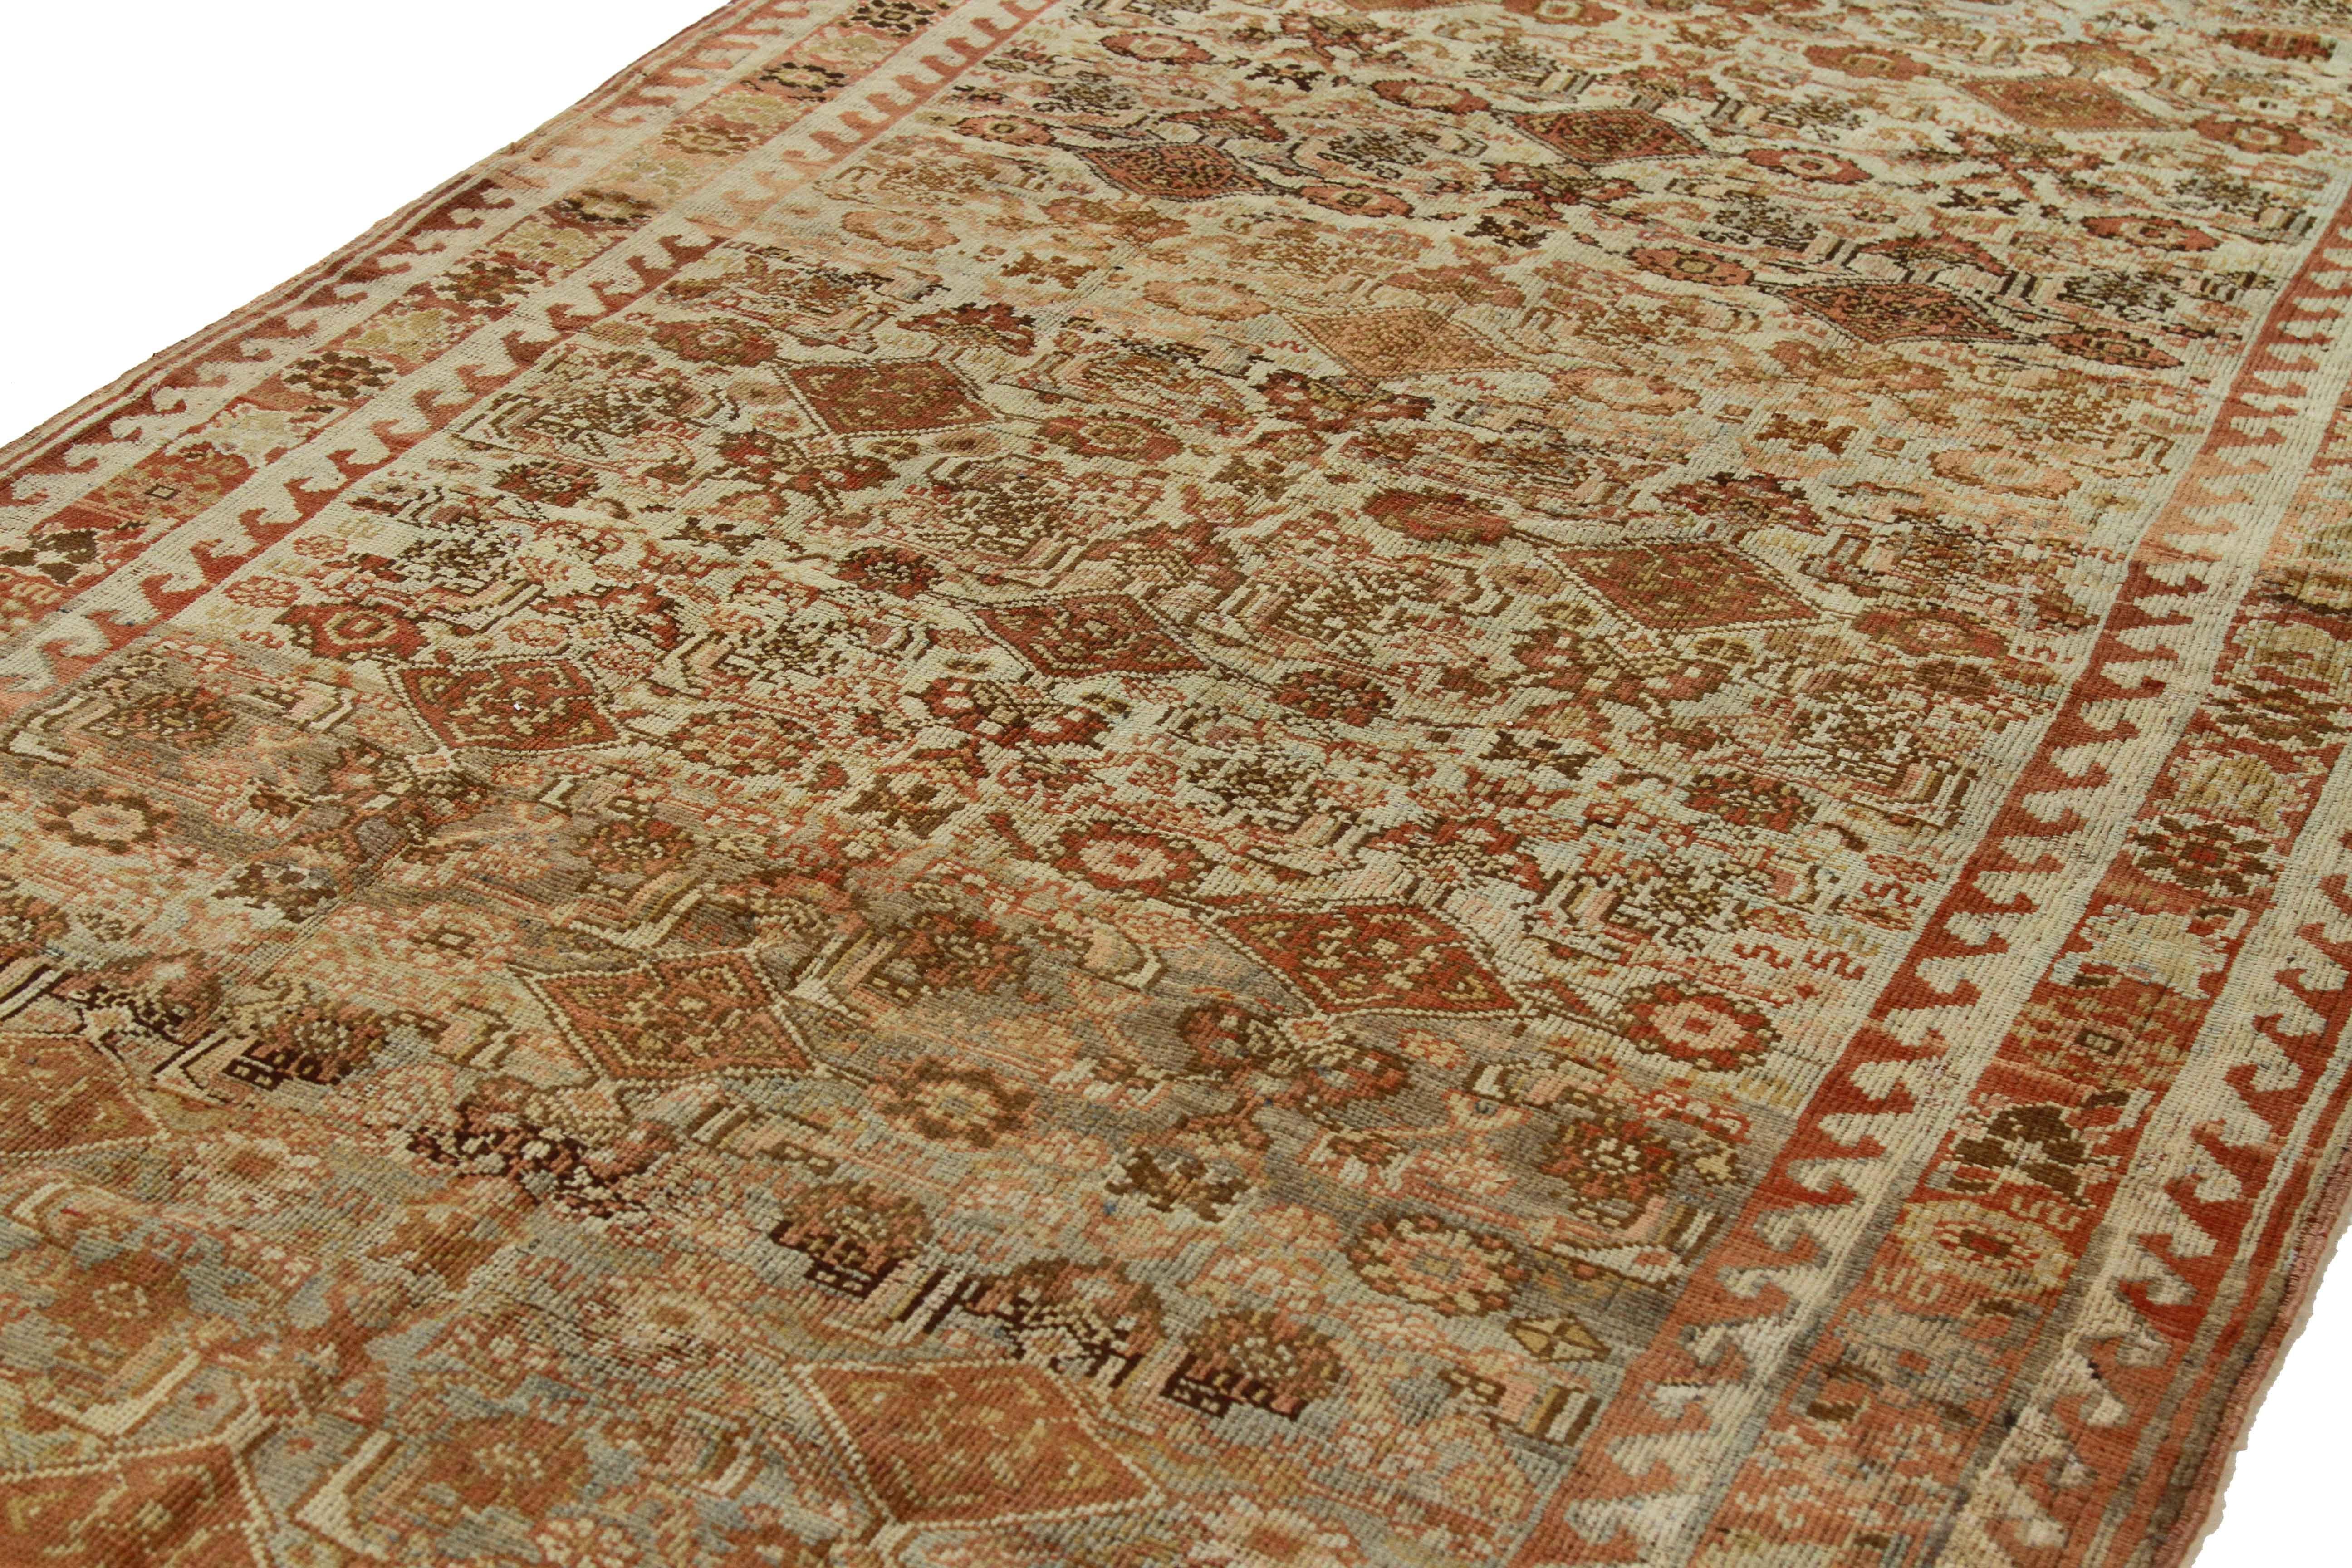 Antique Persian Rug Bijar Style with Traditional Floral Patterns, circa 1930s In Excellent Condition For Sale In Dallas, TX